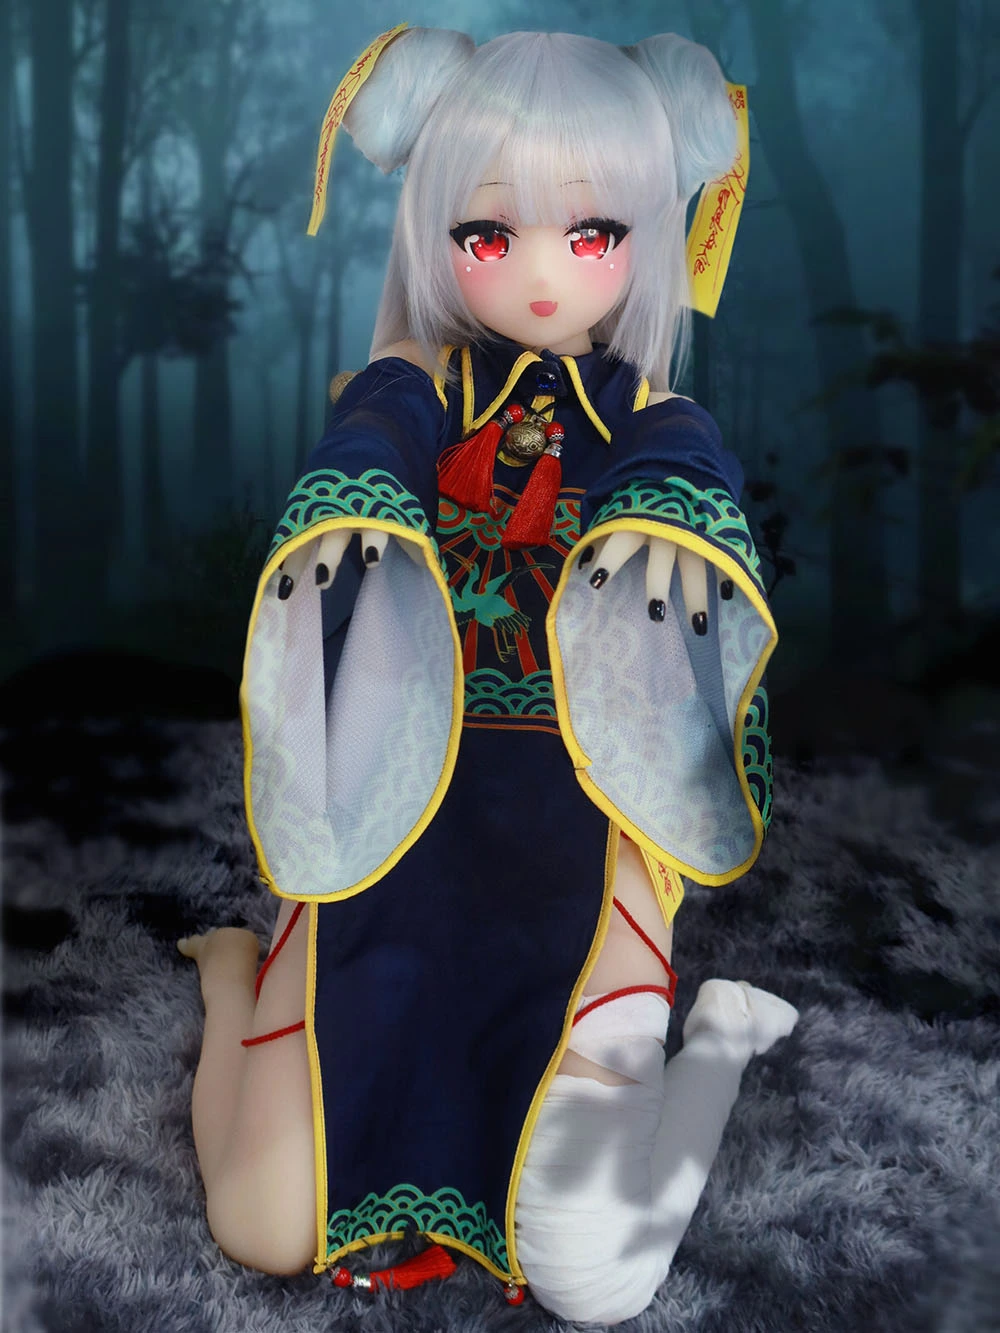 135cm Fantasy Cute Zombie Animated Sex Dolls Lily